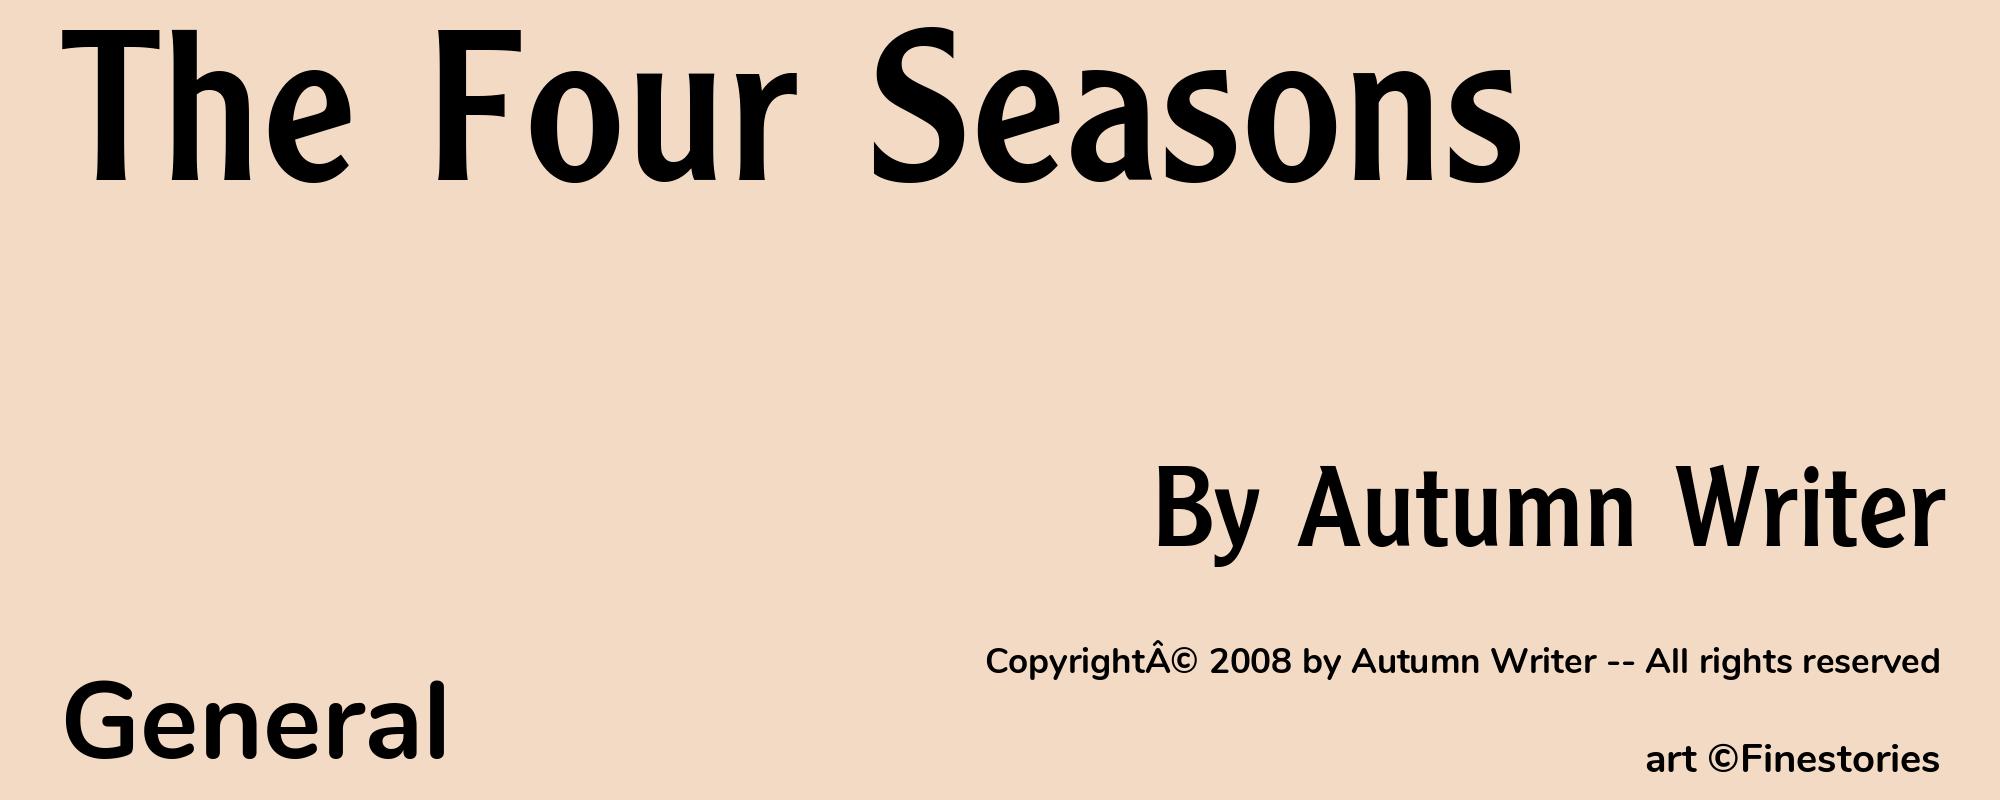 The Four Seasons - Cover